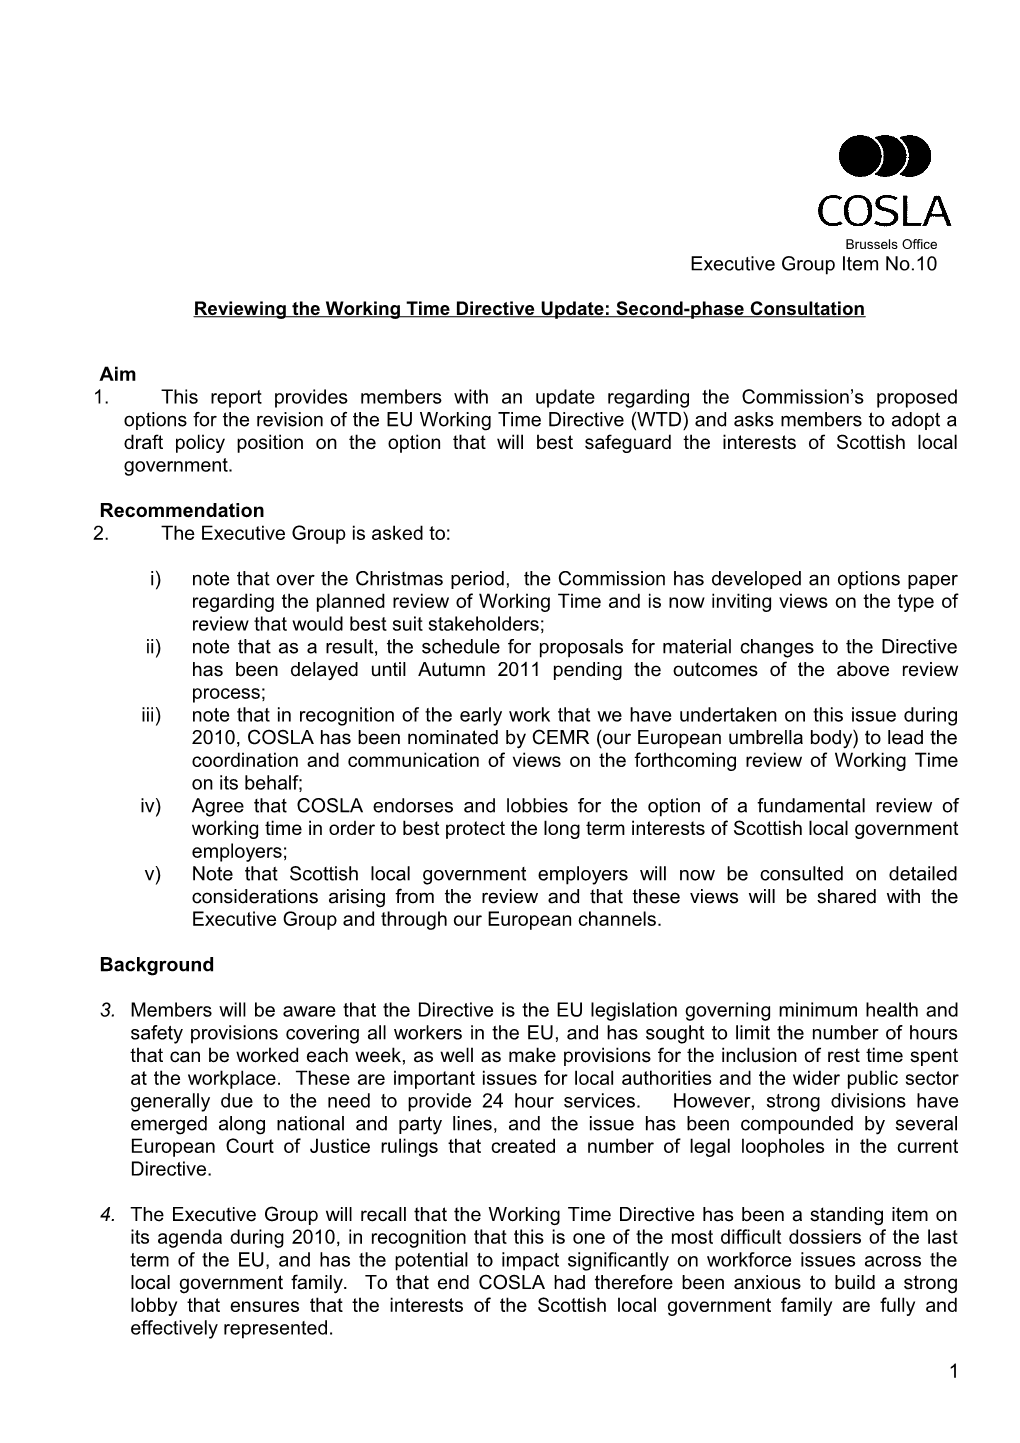 Reviewing the Working Time Directive Update: Second-Phase Consultation